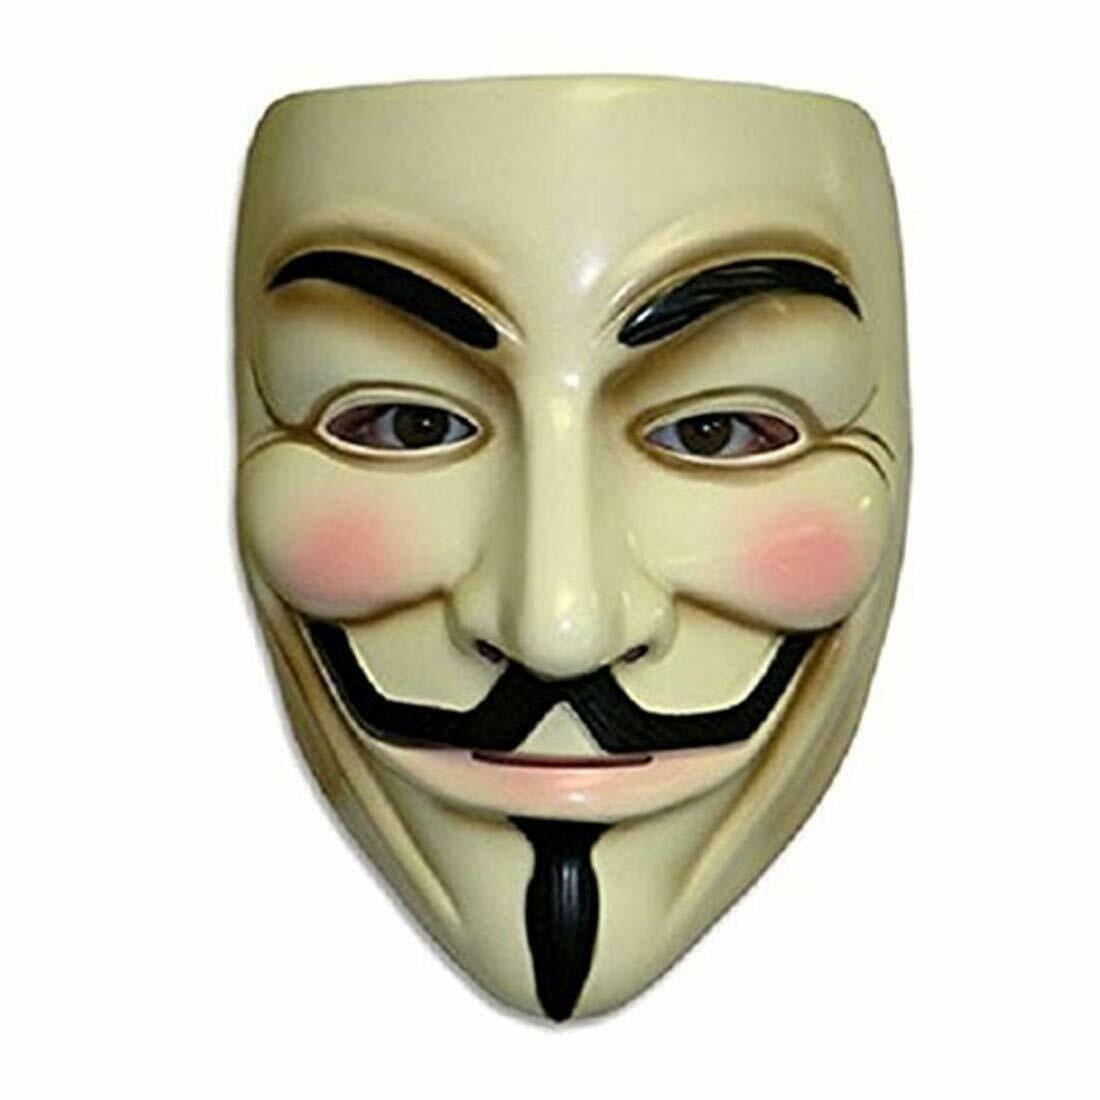 Lot 10pcs New V For Vendetta Mask Guy Fawkes Anonymous Masks Party Cosplay 